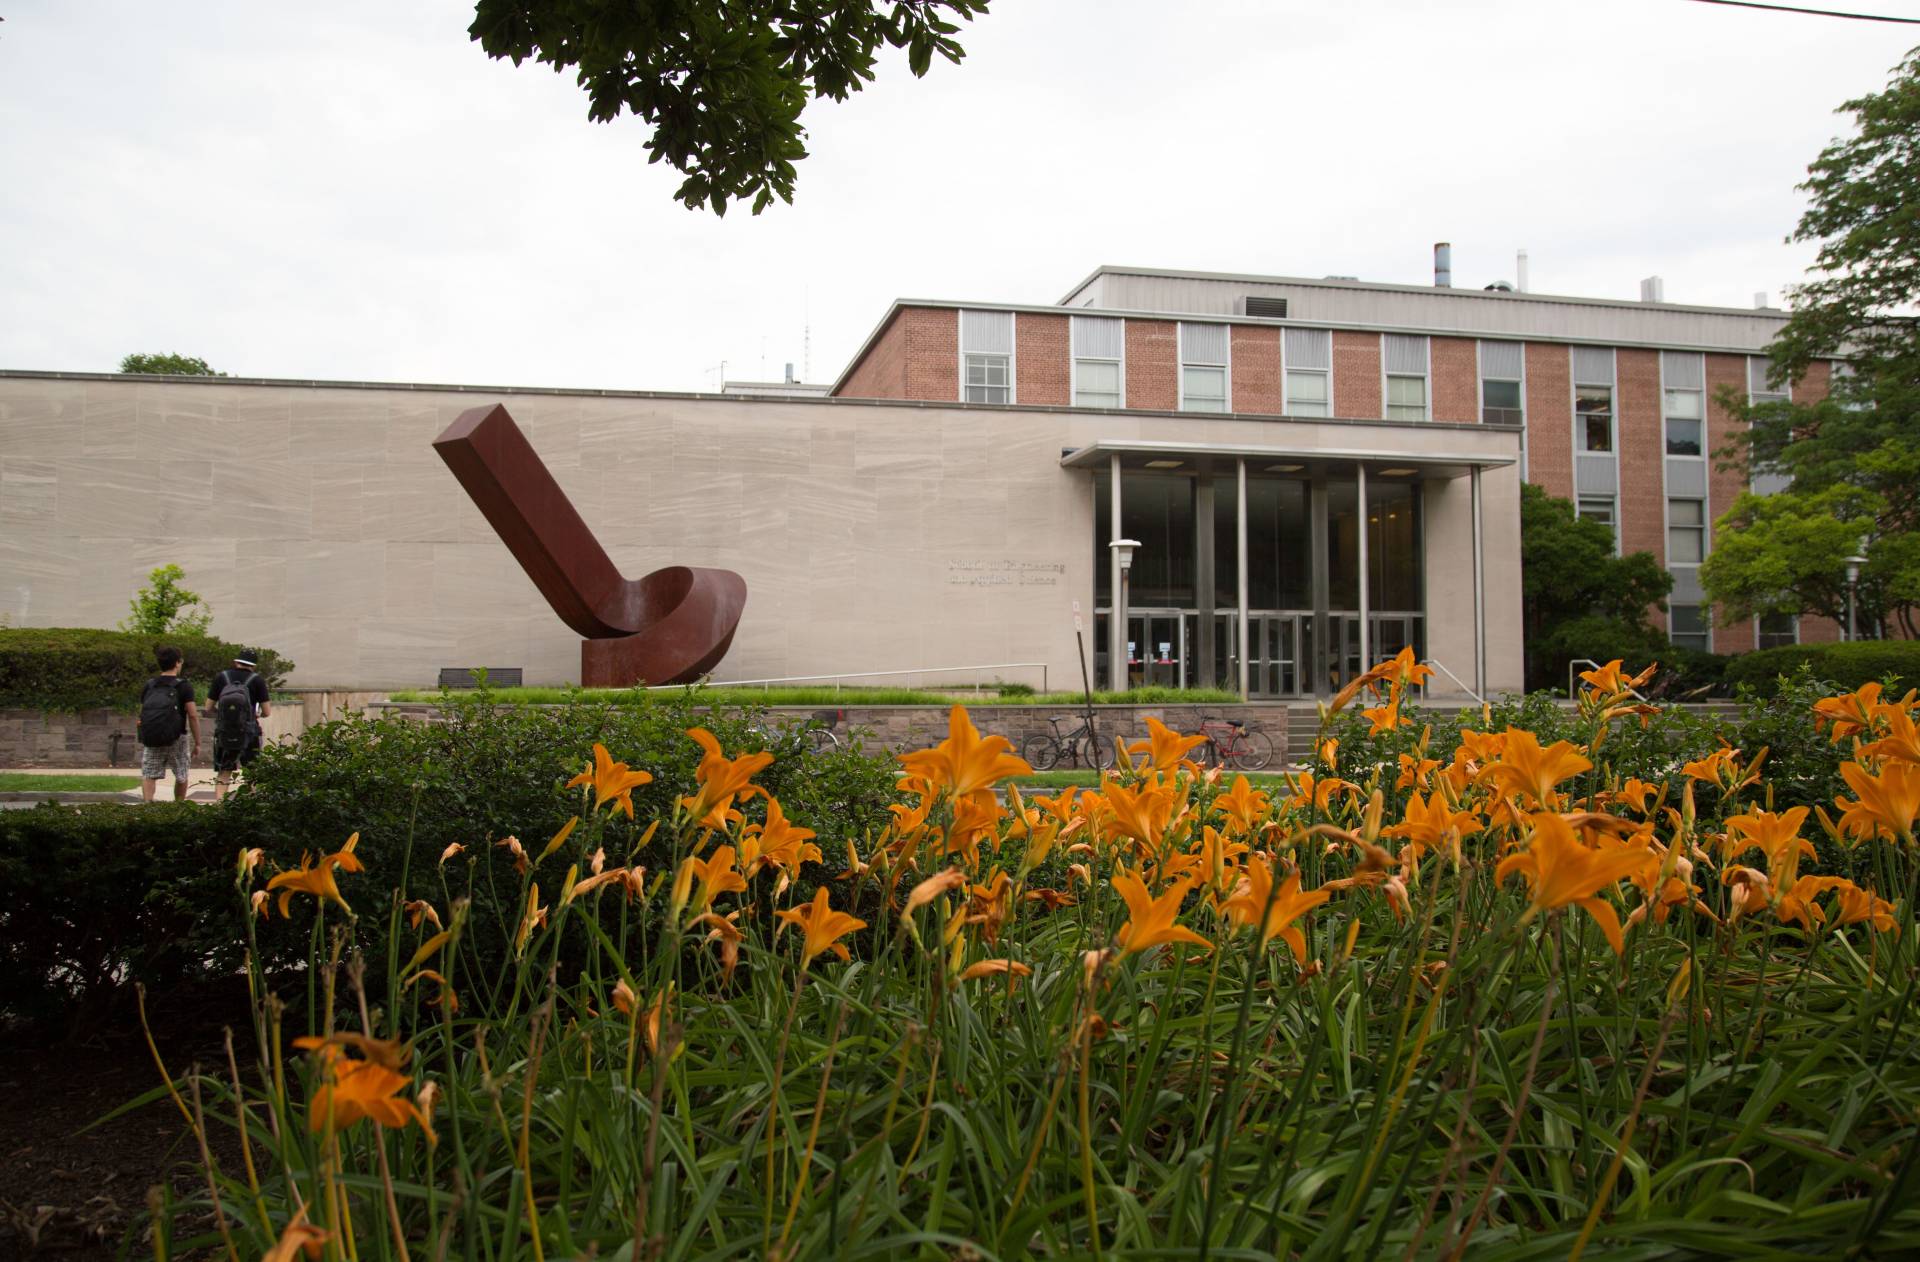 Exterior view of the engineering school, with orange flowers in the foreground.